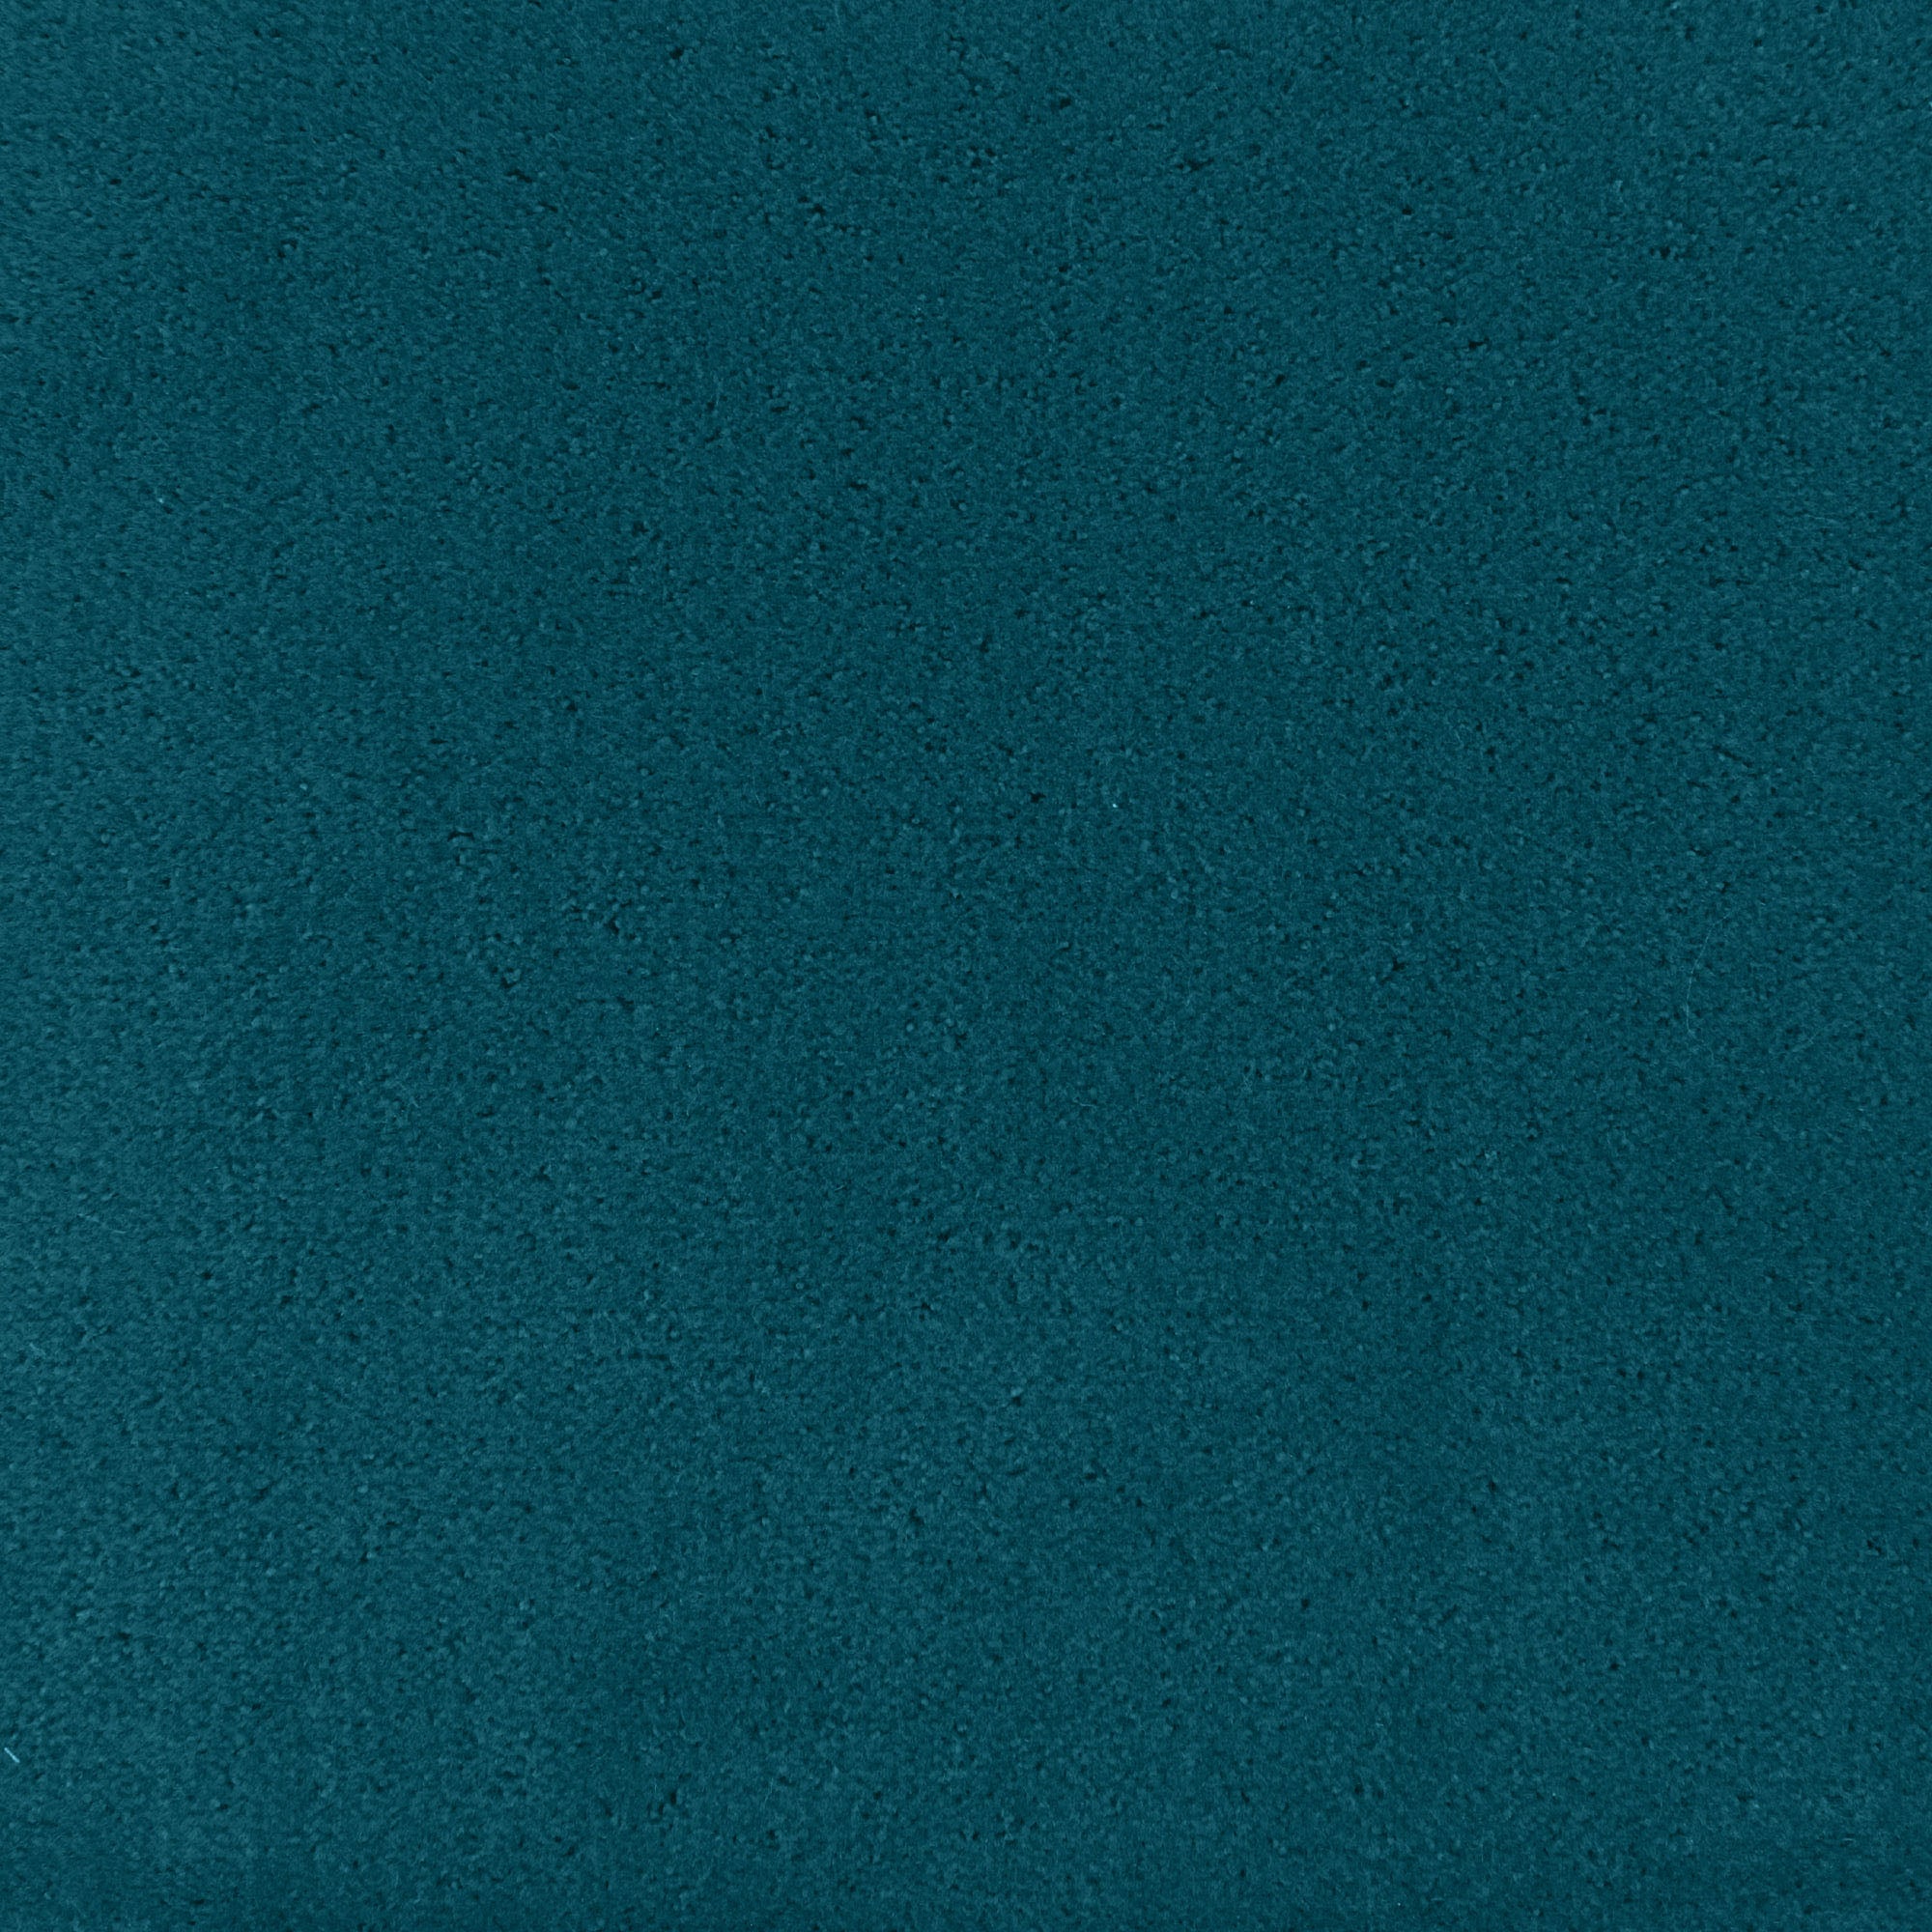 Luxurious 100% Mohair Velvet Thick Heavy Weight Upholstery Fabric